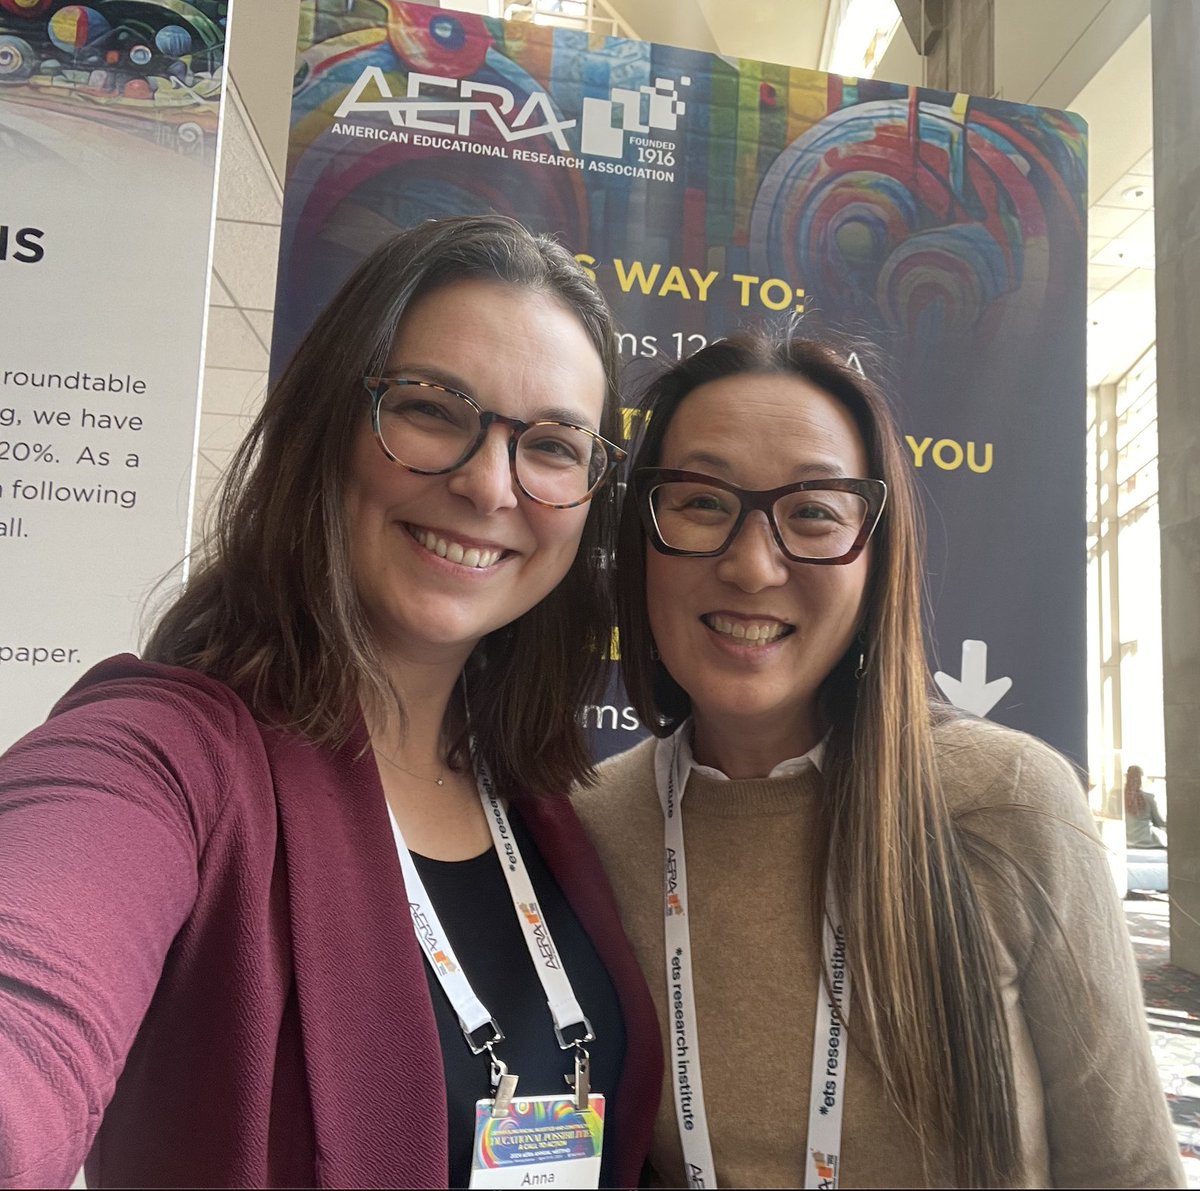 A wonderful full-circle moment: I ran into @soortle at a coffee shop during #AERA24, and she came to my presentation. Her education classes at @Wellesley are the reason I am here.